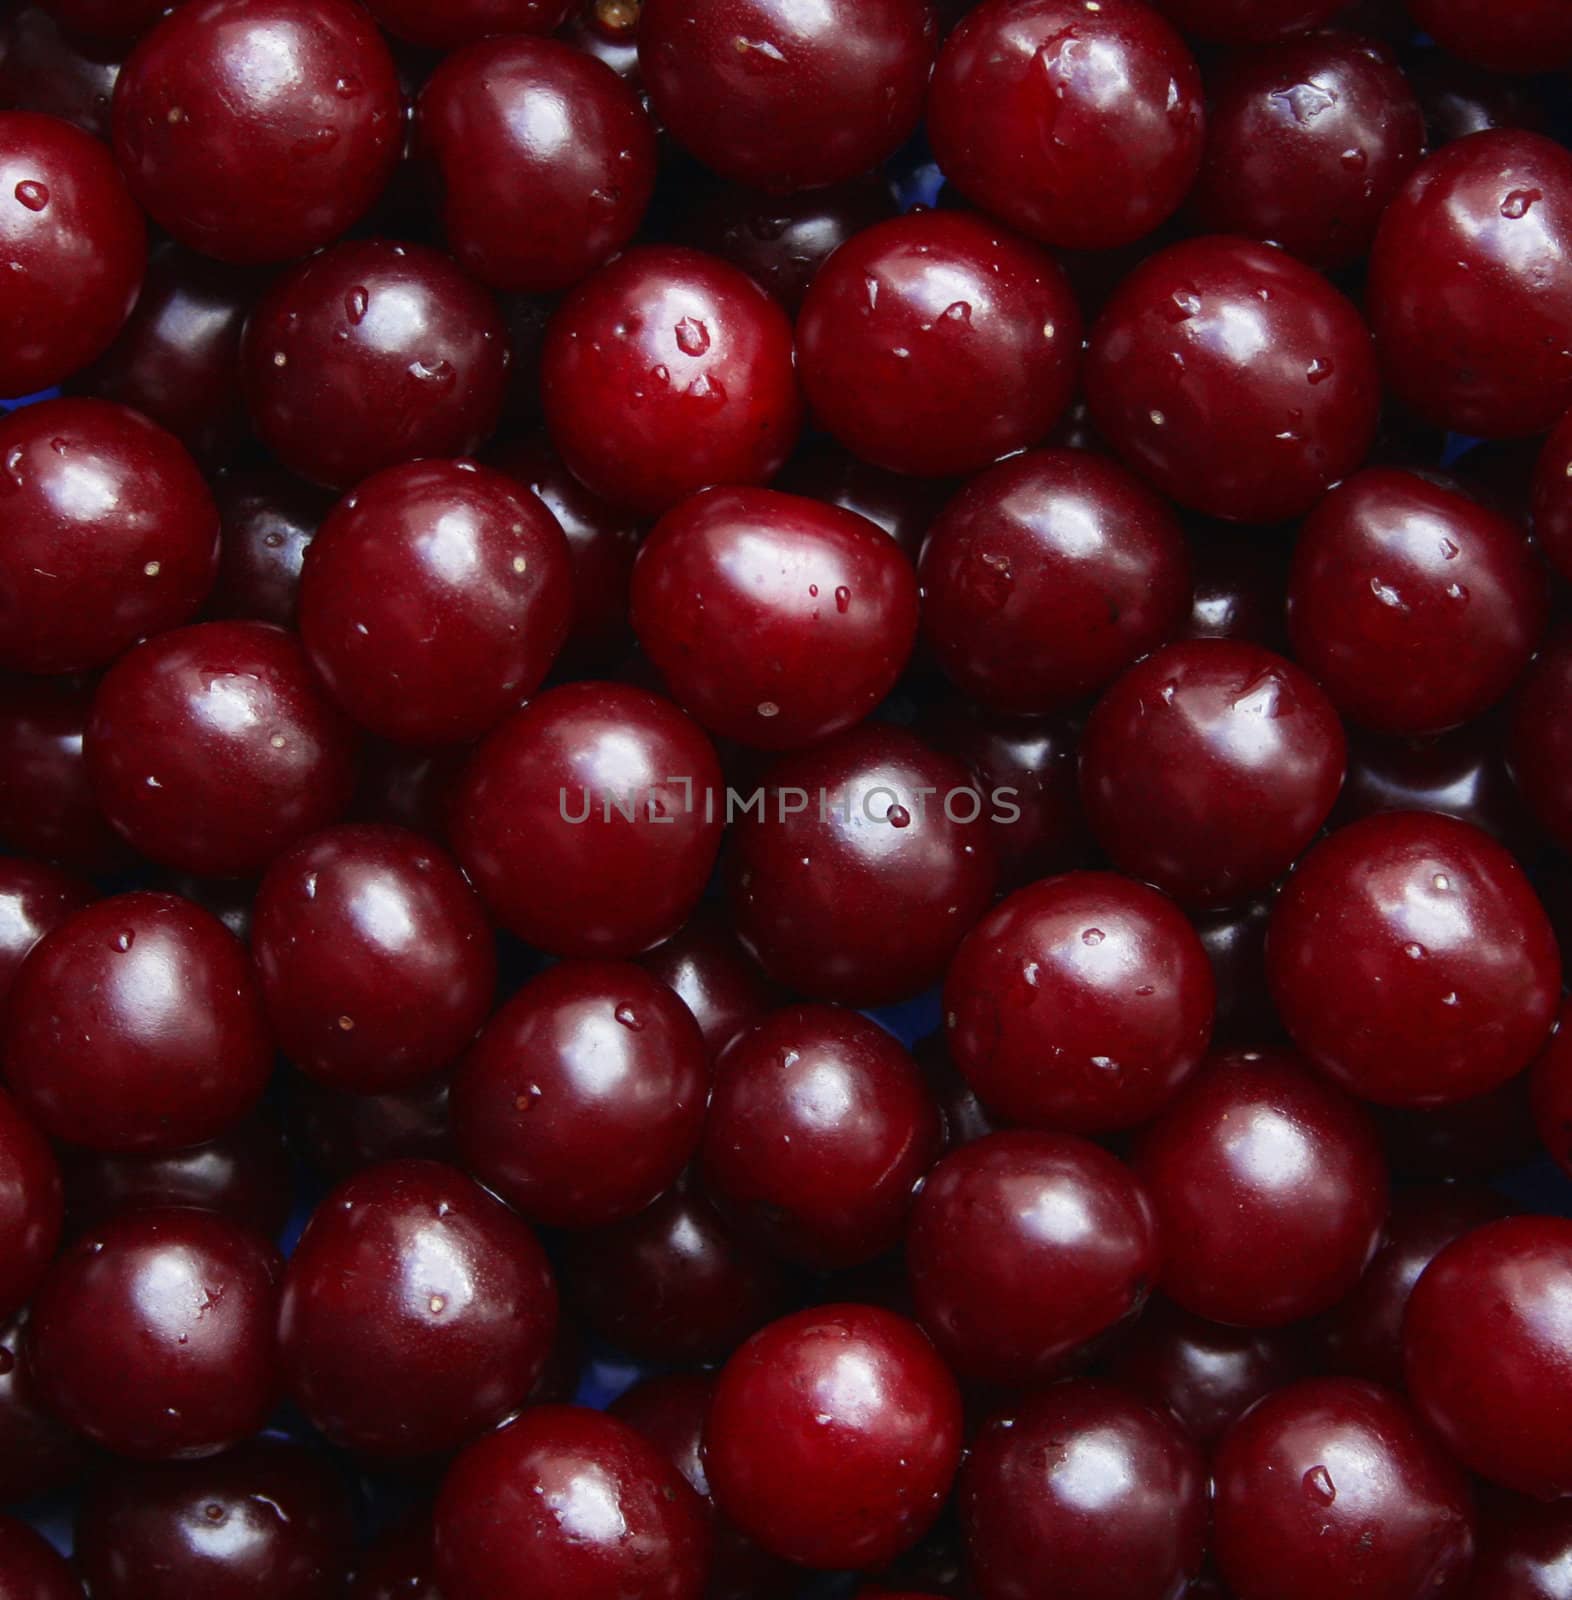 Wet ripe cherries can use as background